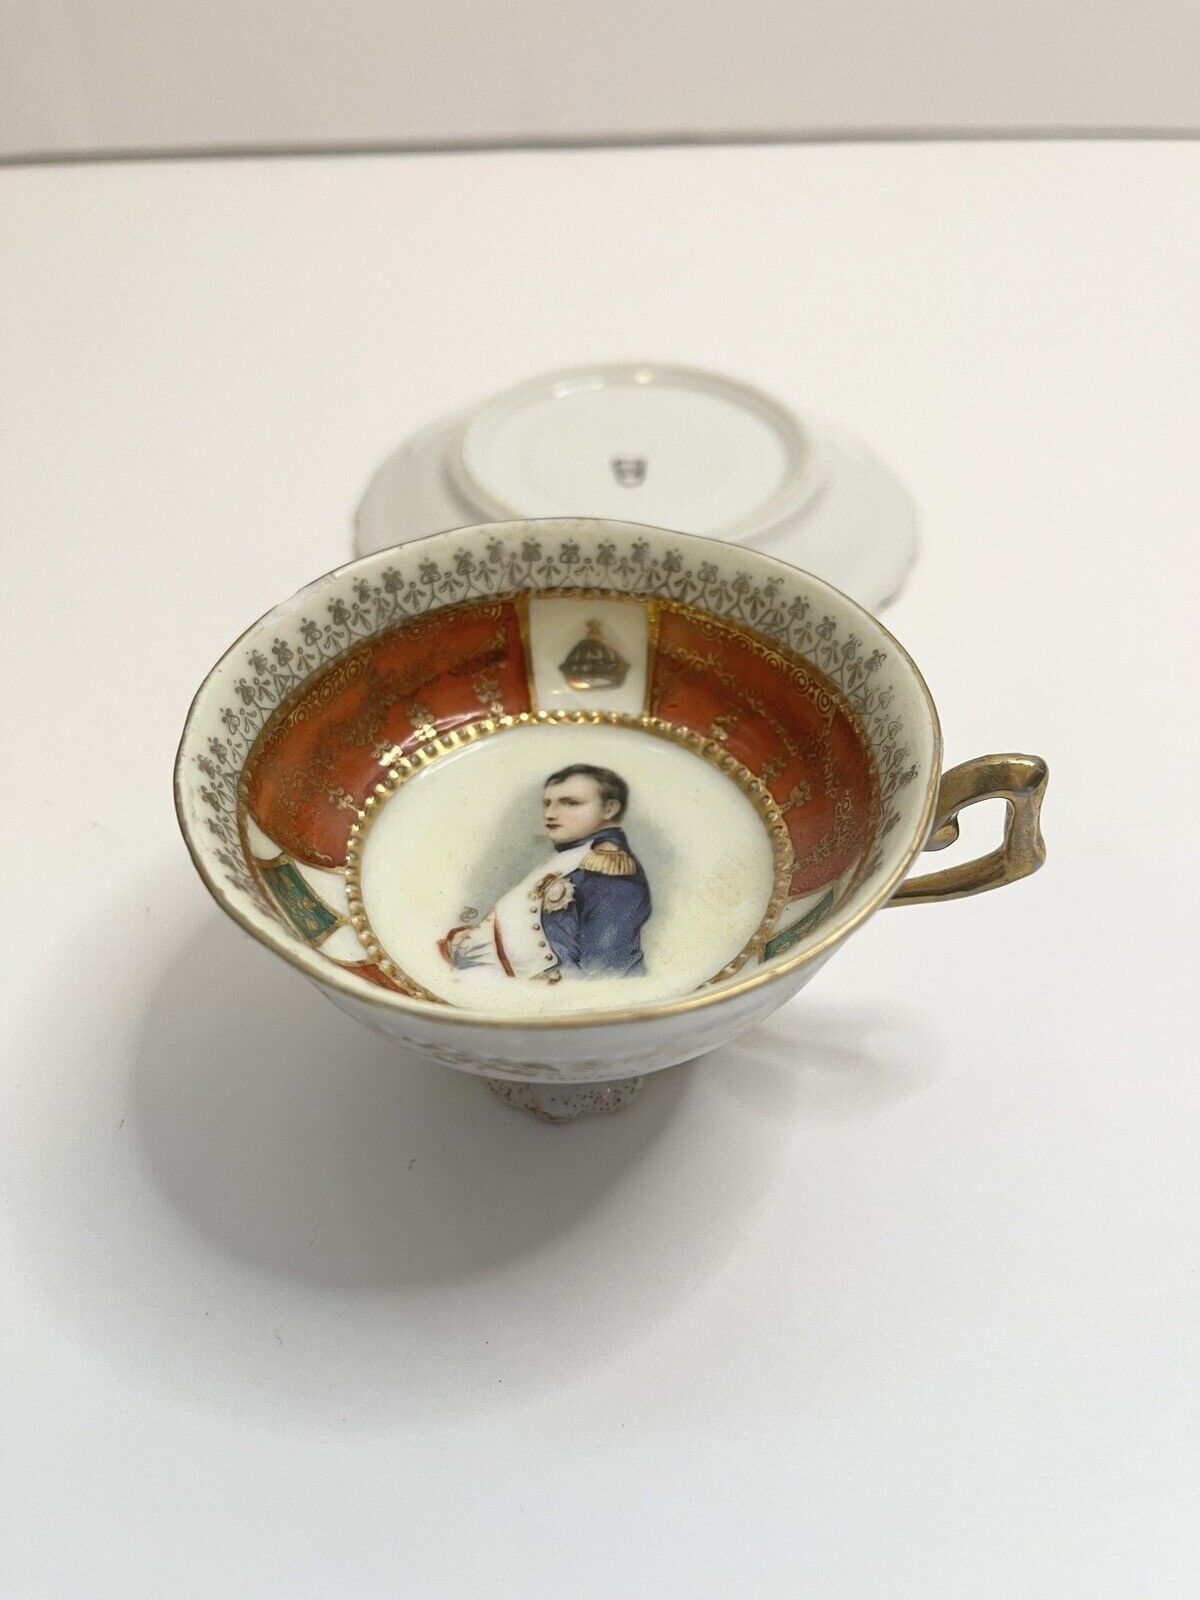 Rare Antique Tea Cup and Saucer With Napoleon Portrait. Possibly by Edme Samson